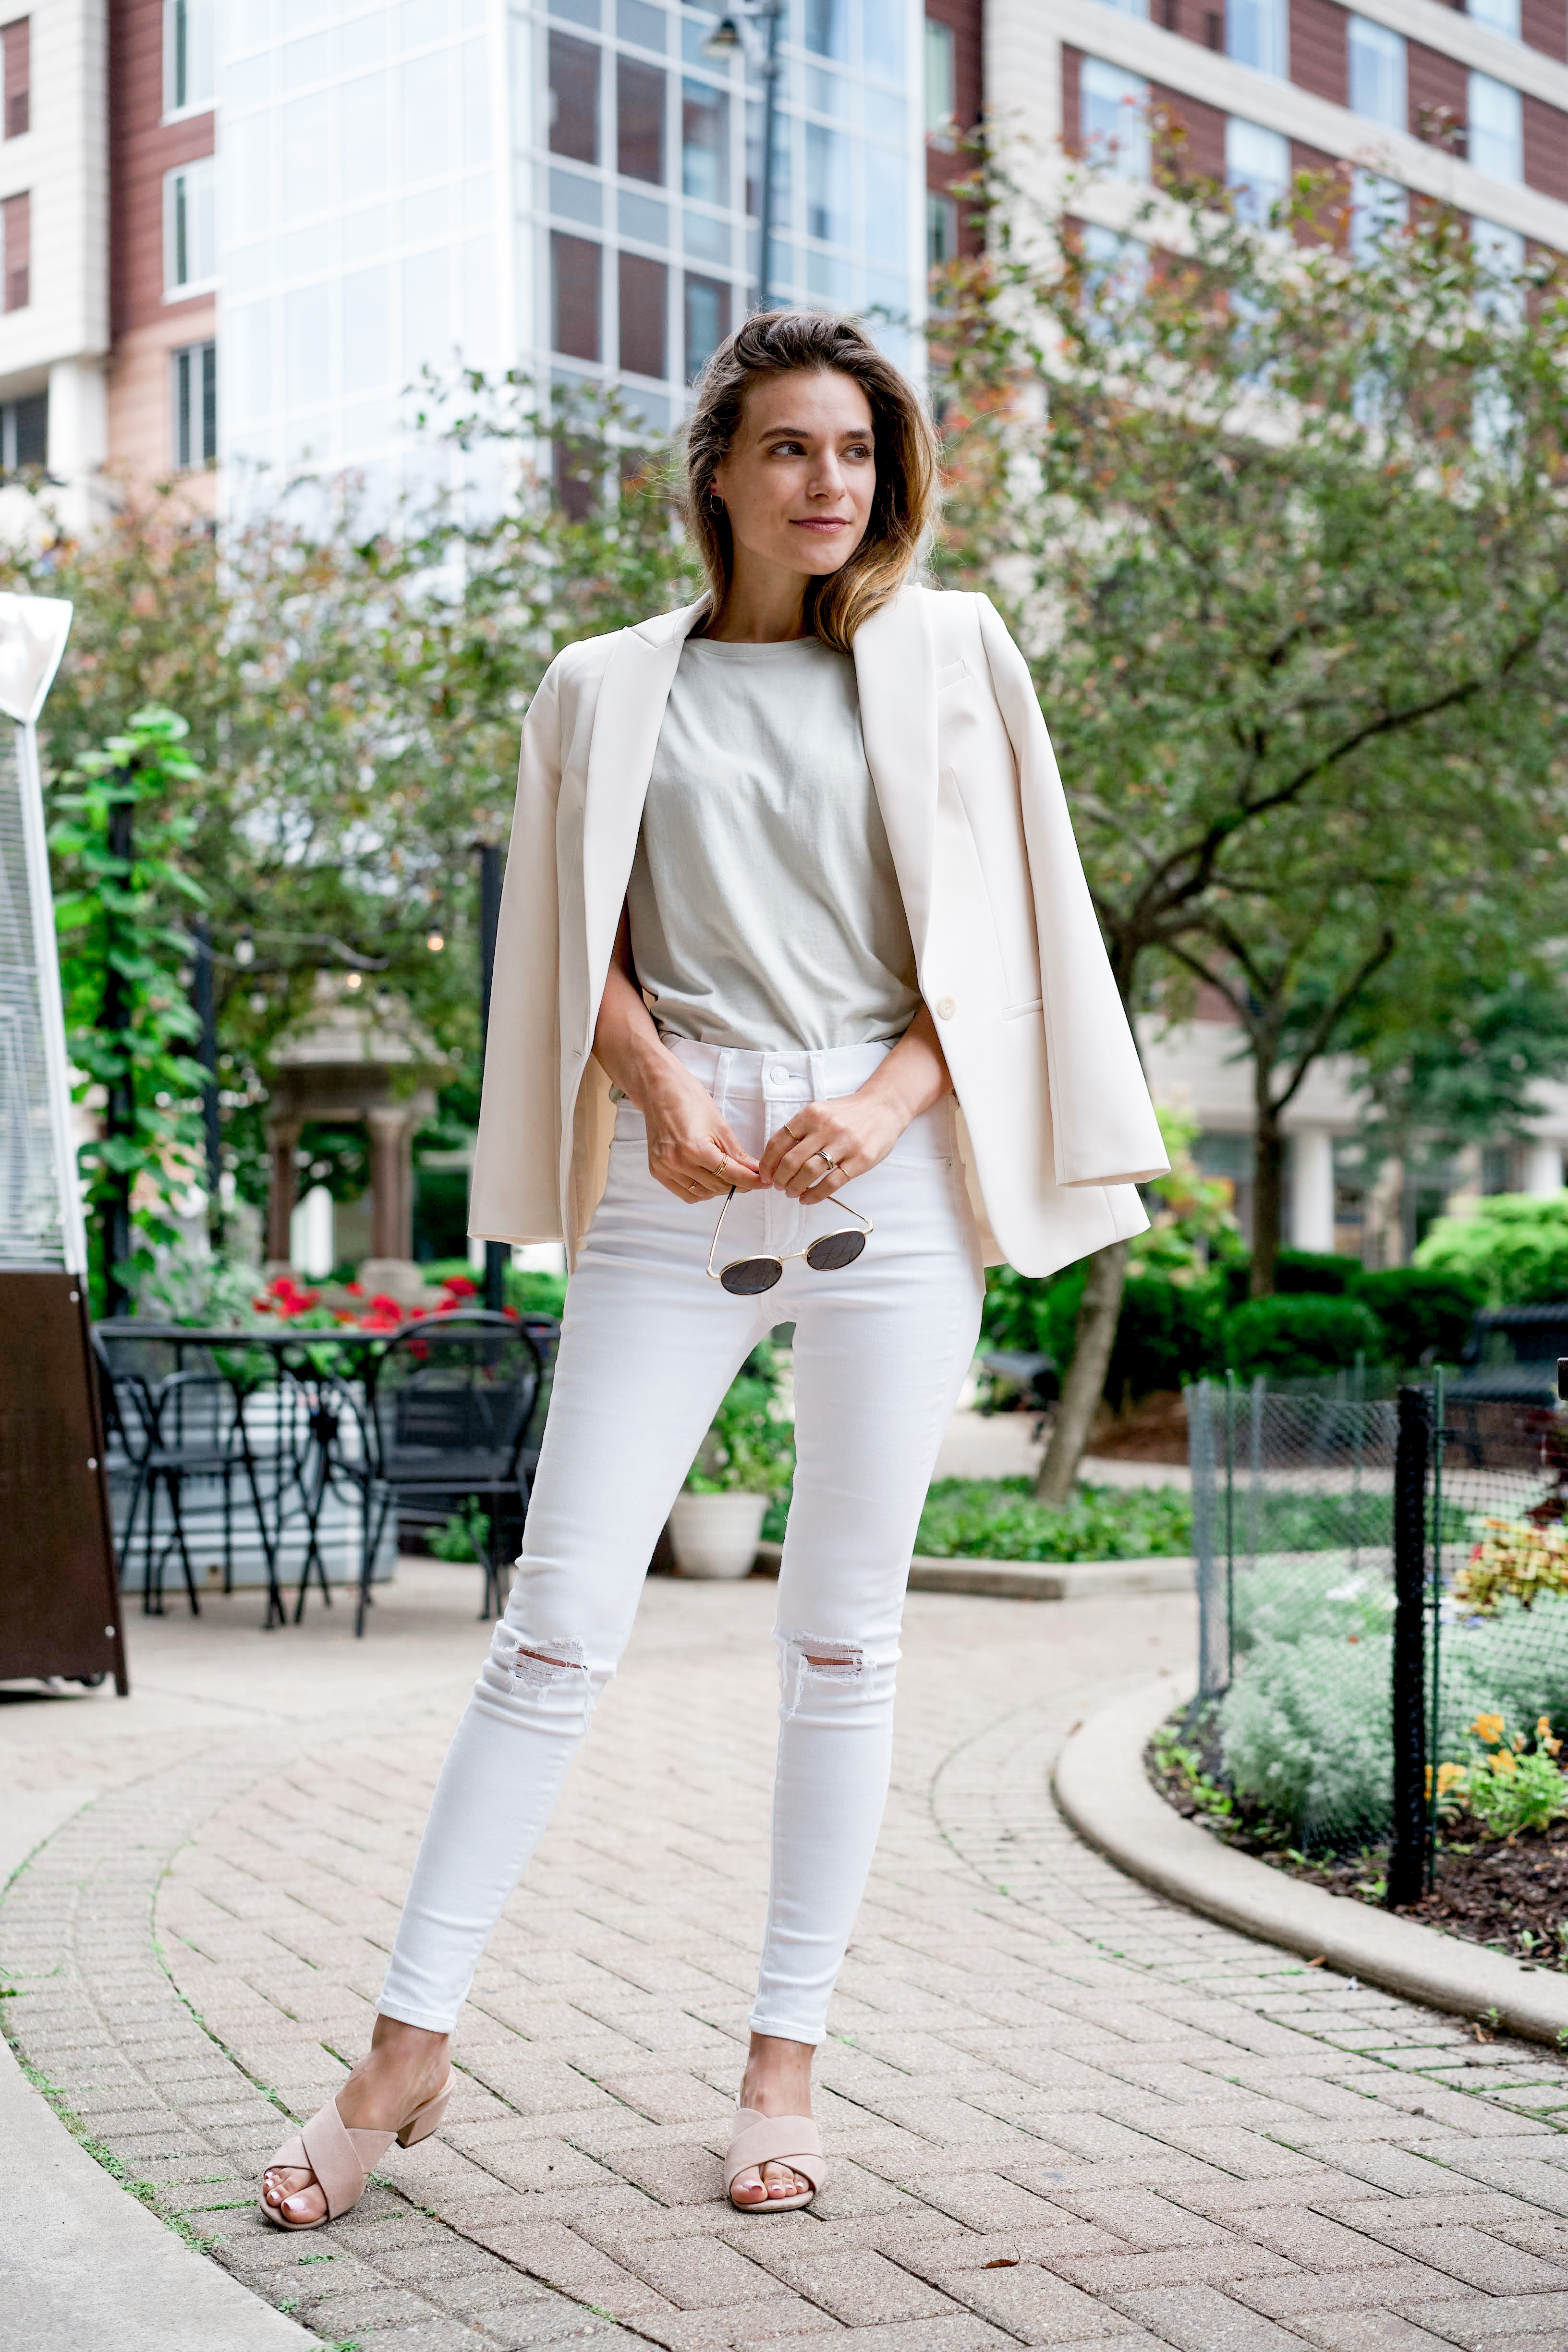 An Easy White Monochrome Outfit To Transition Into Fall With - The